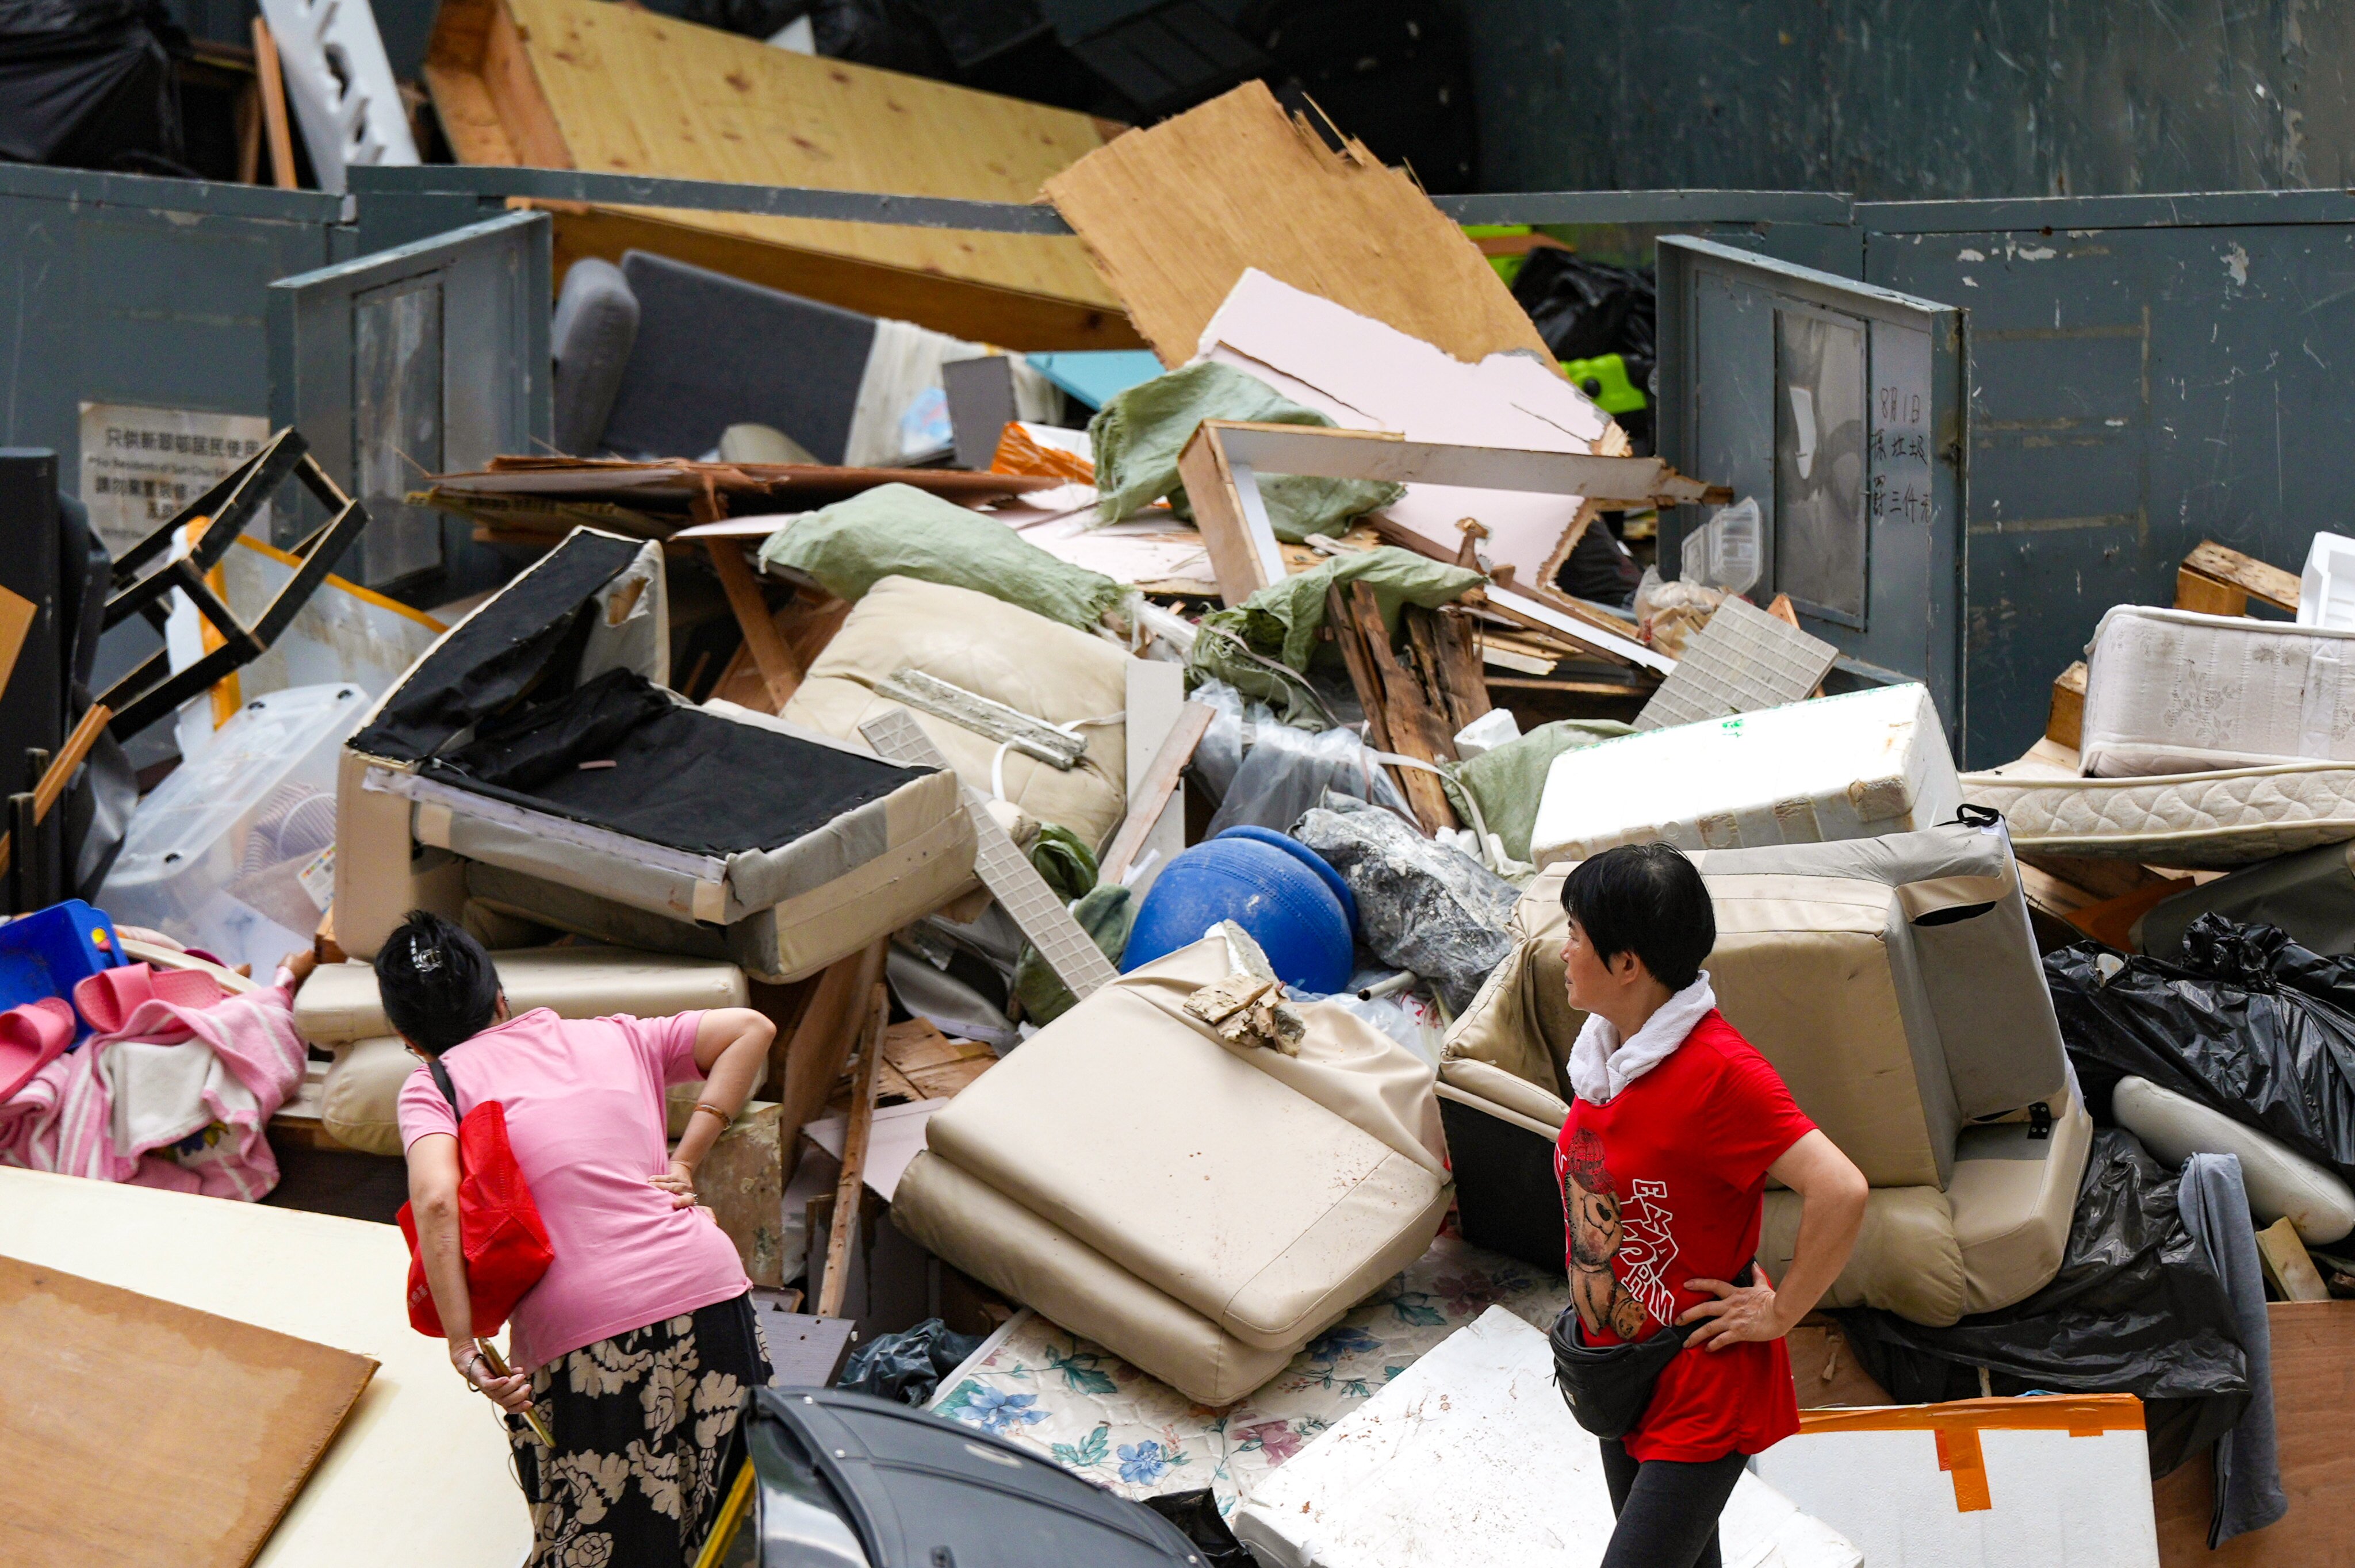 A controversial waste-charging scheme was shelved after public opposition. Photo: Eugene Lee